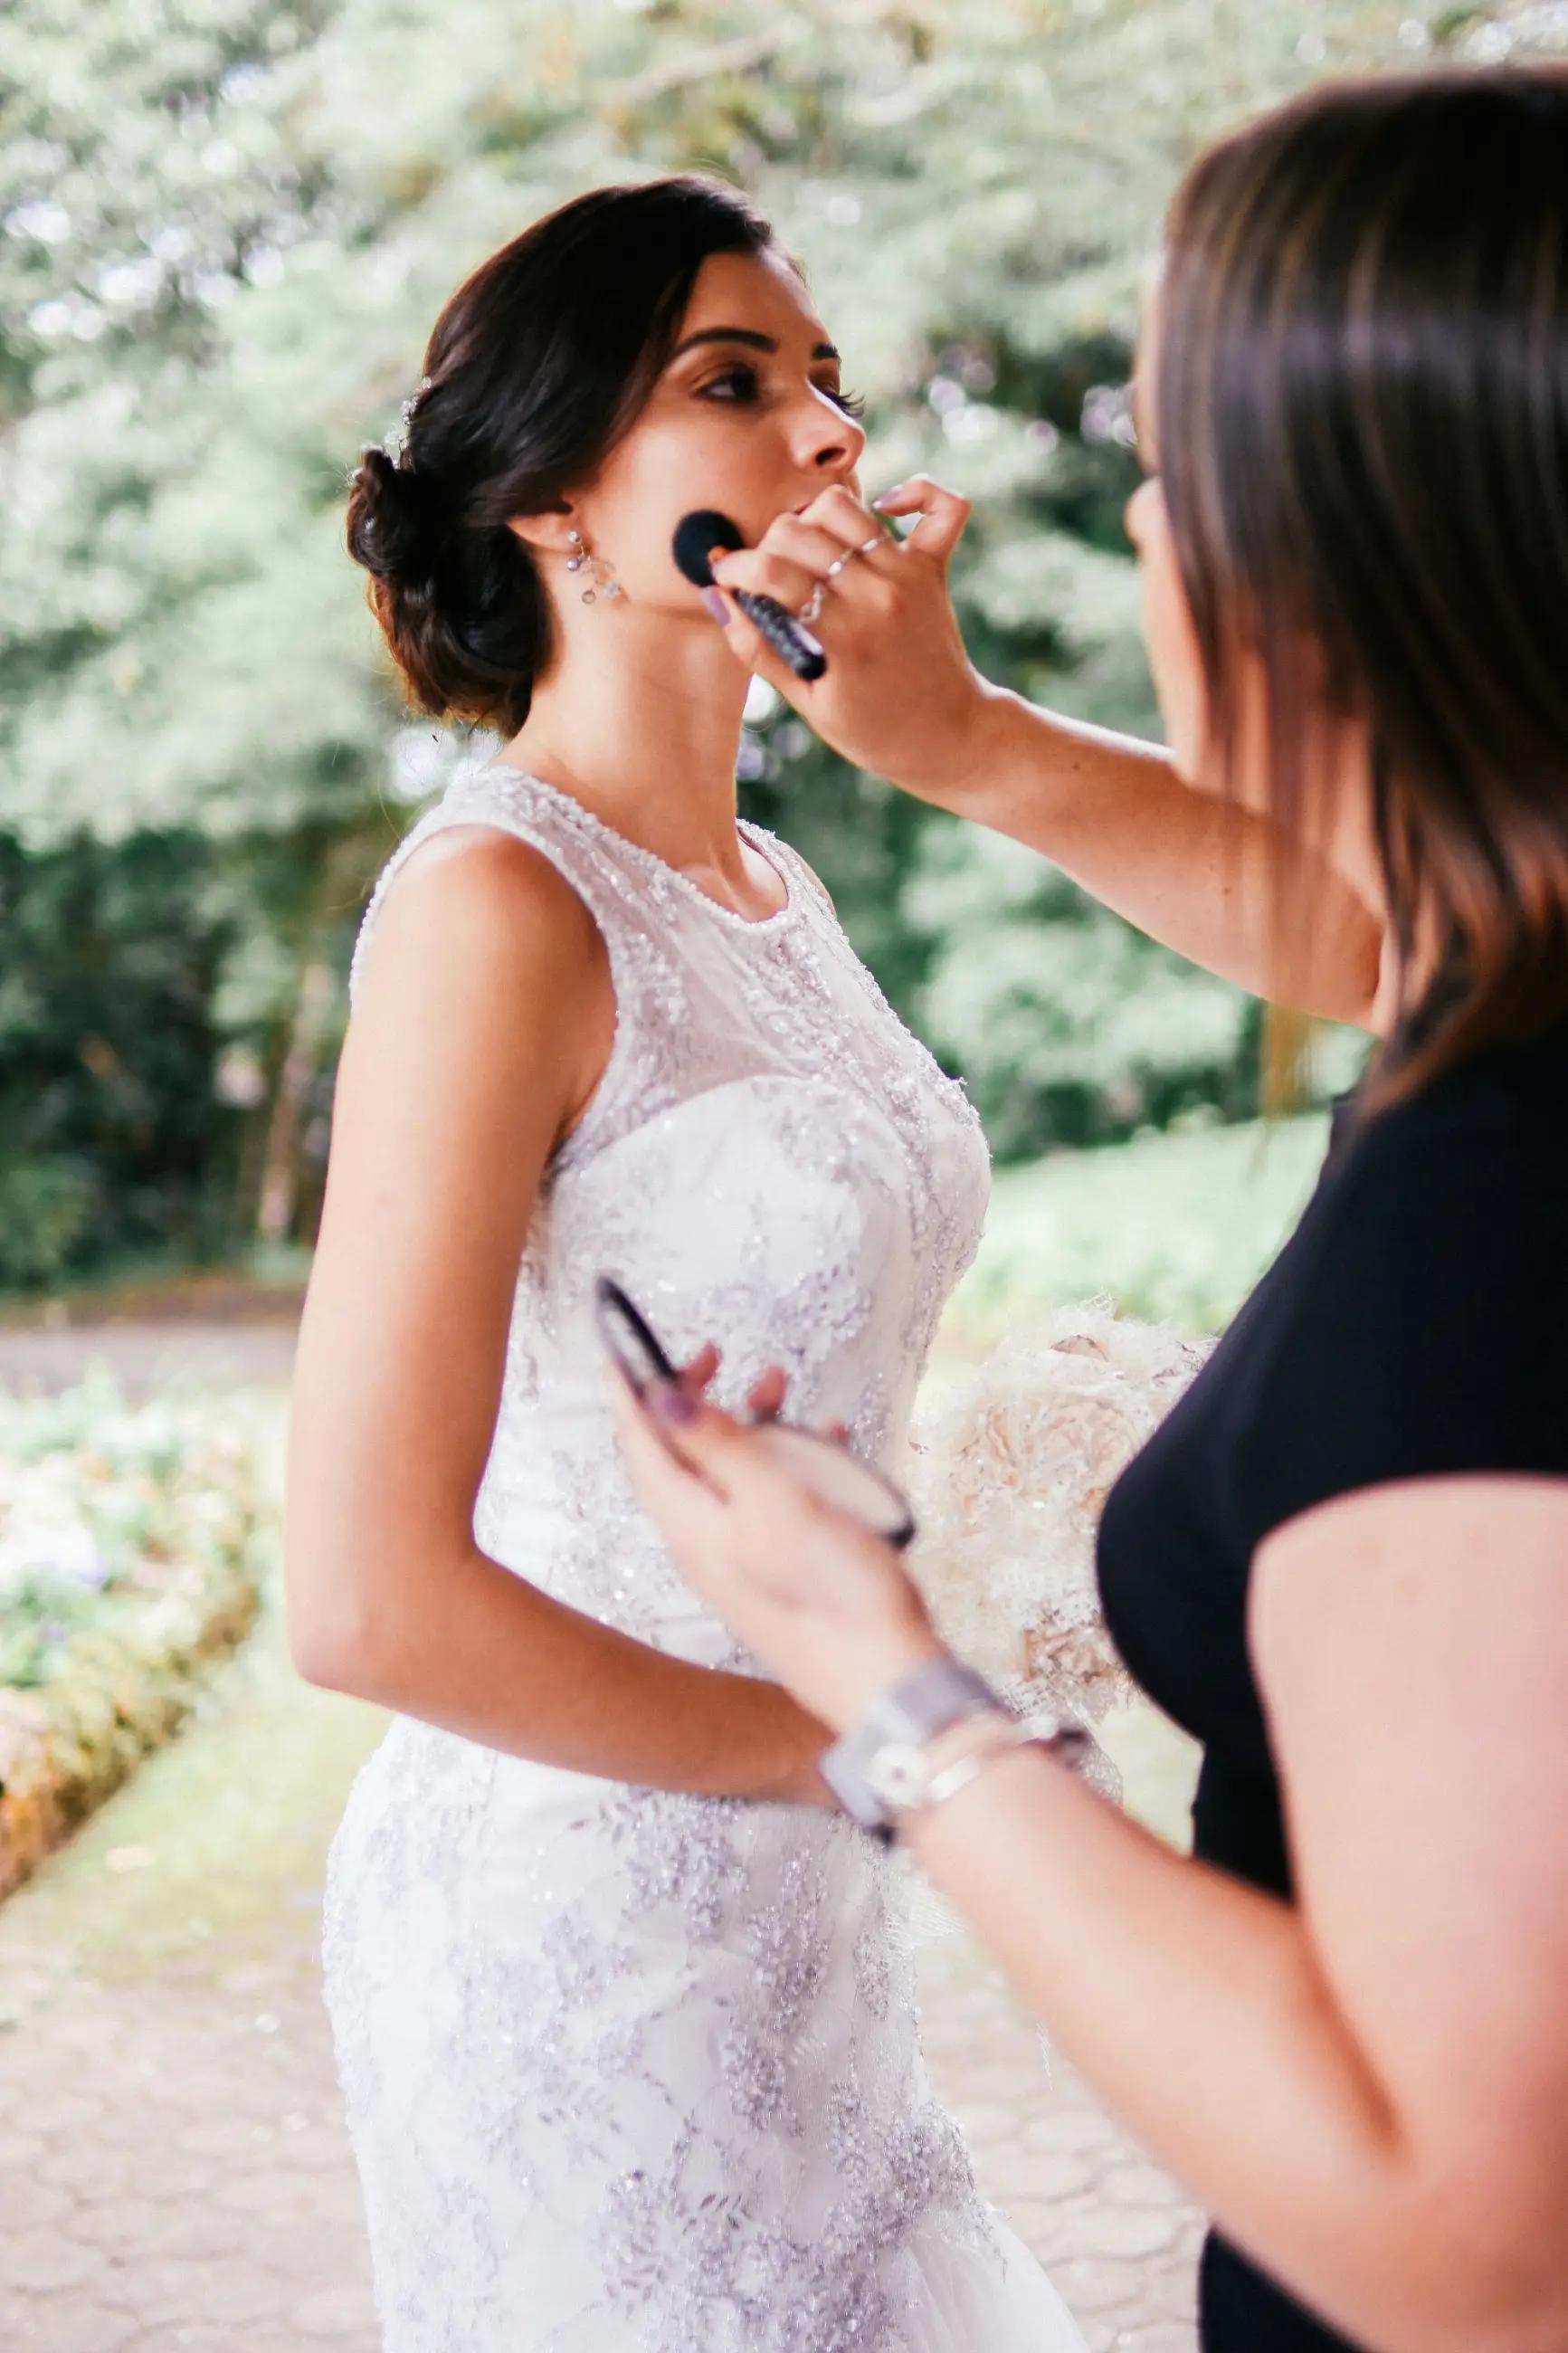 Bridal Beauty Tips for a Radiant Bridal Glow Image